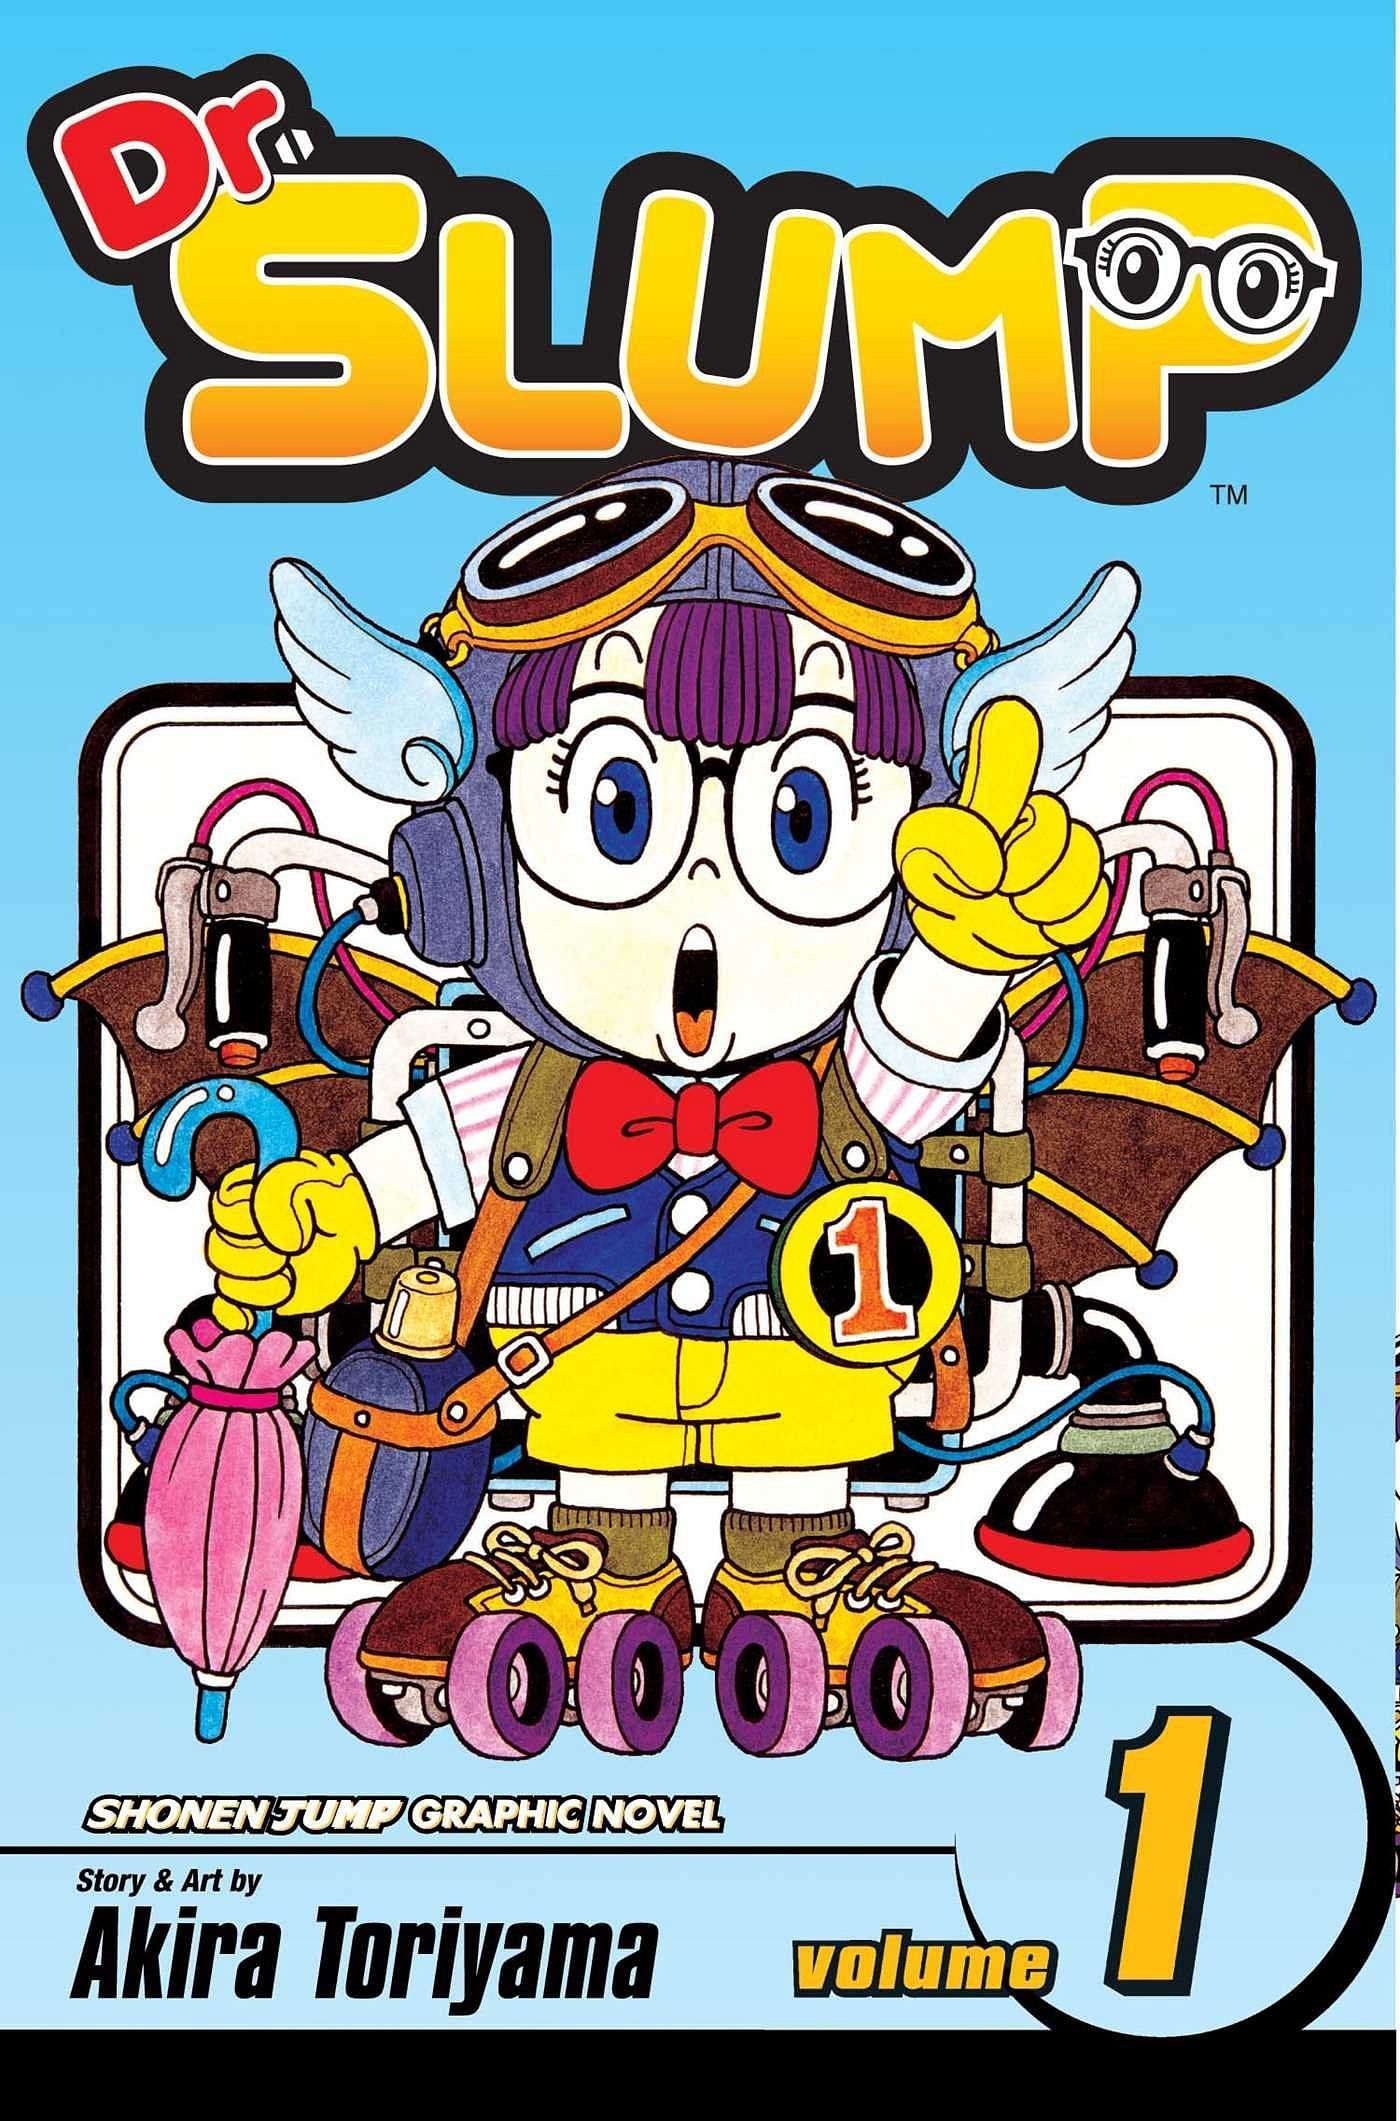 The cover of Dr. Slump Volume 1, another manga by Toriyama. Purple haired protagonist Arale is featured, who eventually guest stars in an episode of Dragon Ball Super (Image via Shueisha)